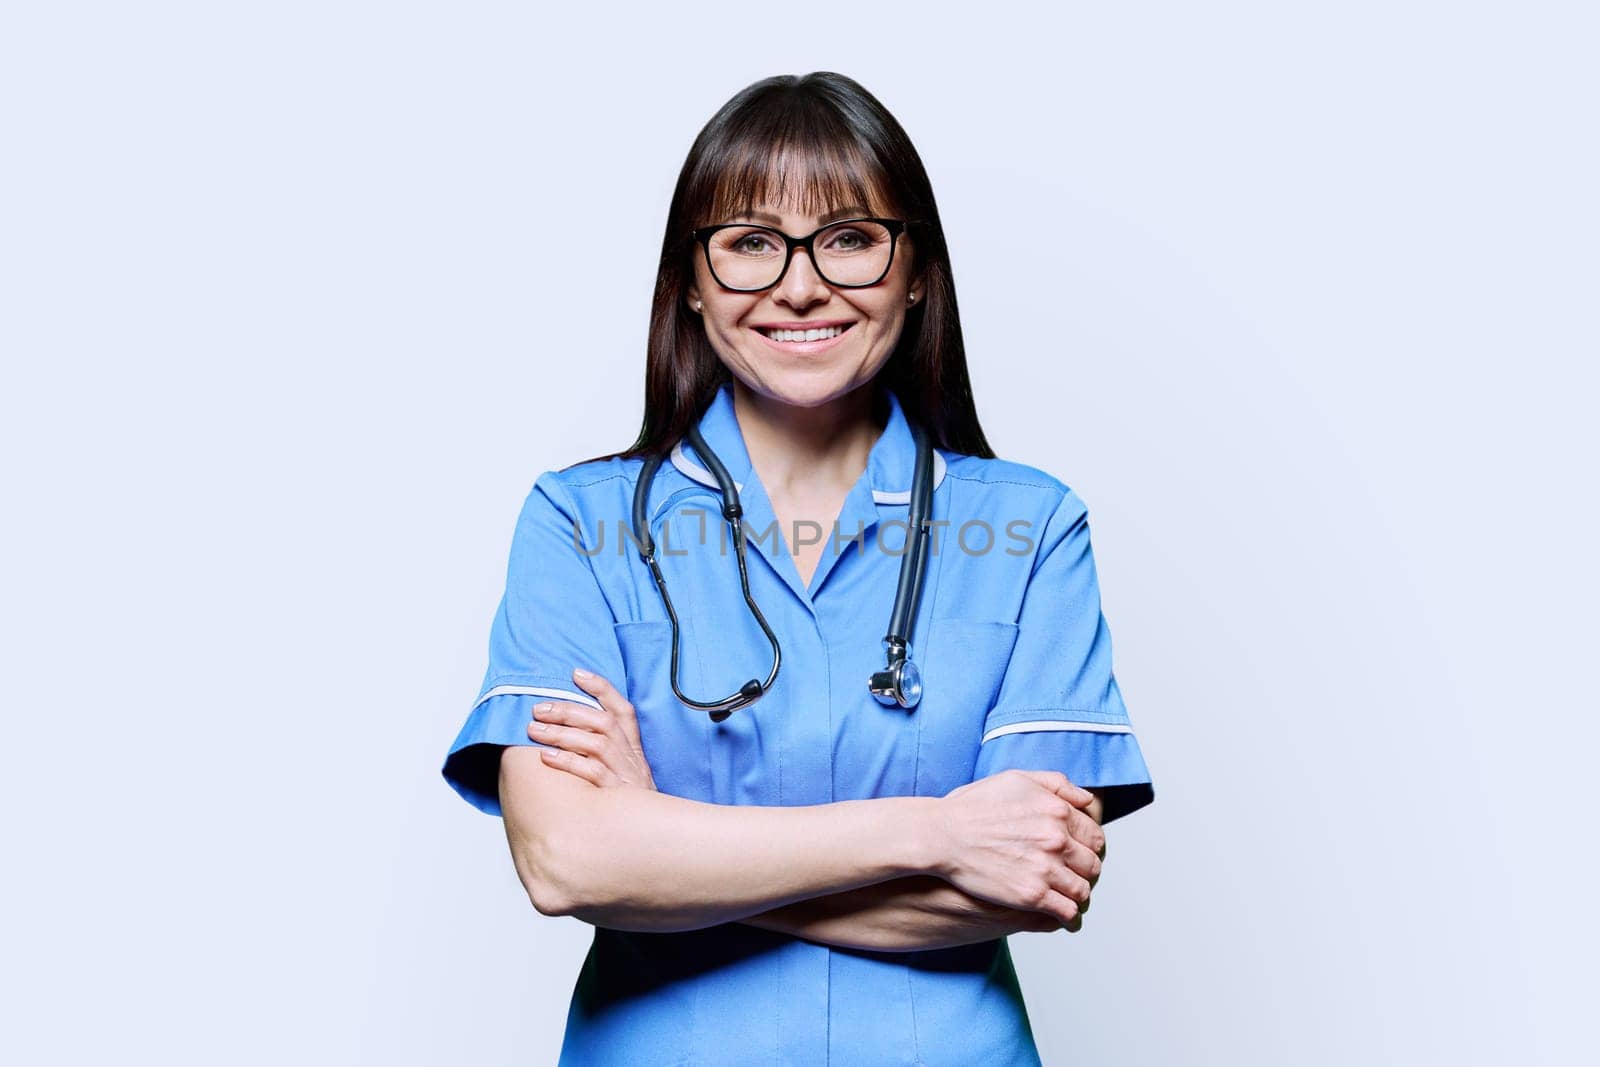 Portrait of smiling middle-aged woman nurse in blue with crossed arms with stethoscope on white studio background. Medical services, nhs, health, professional assistance, medical care concept